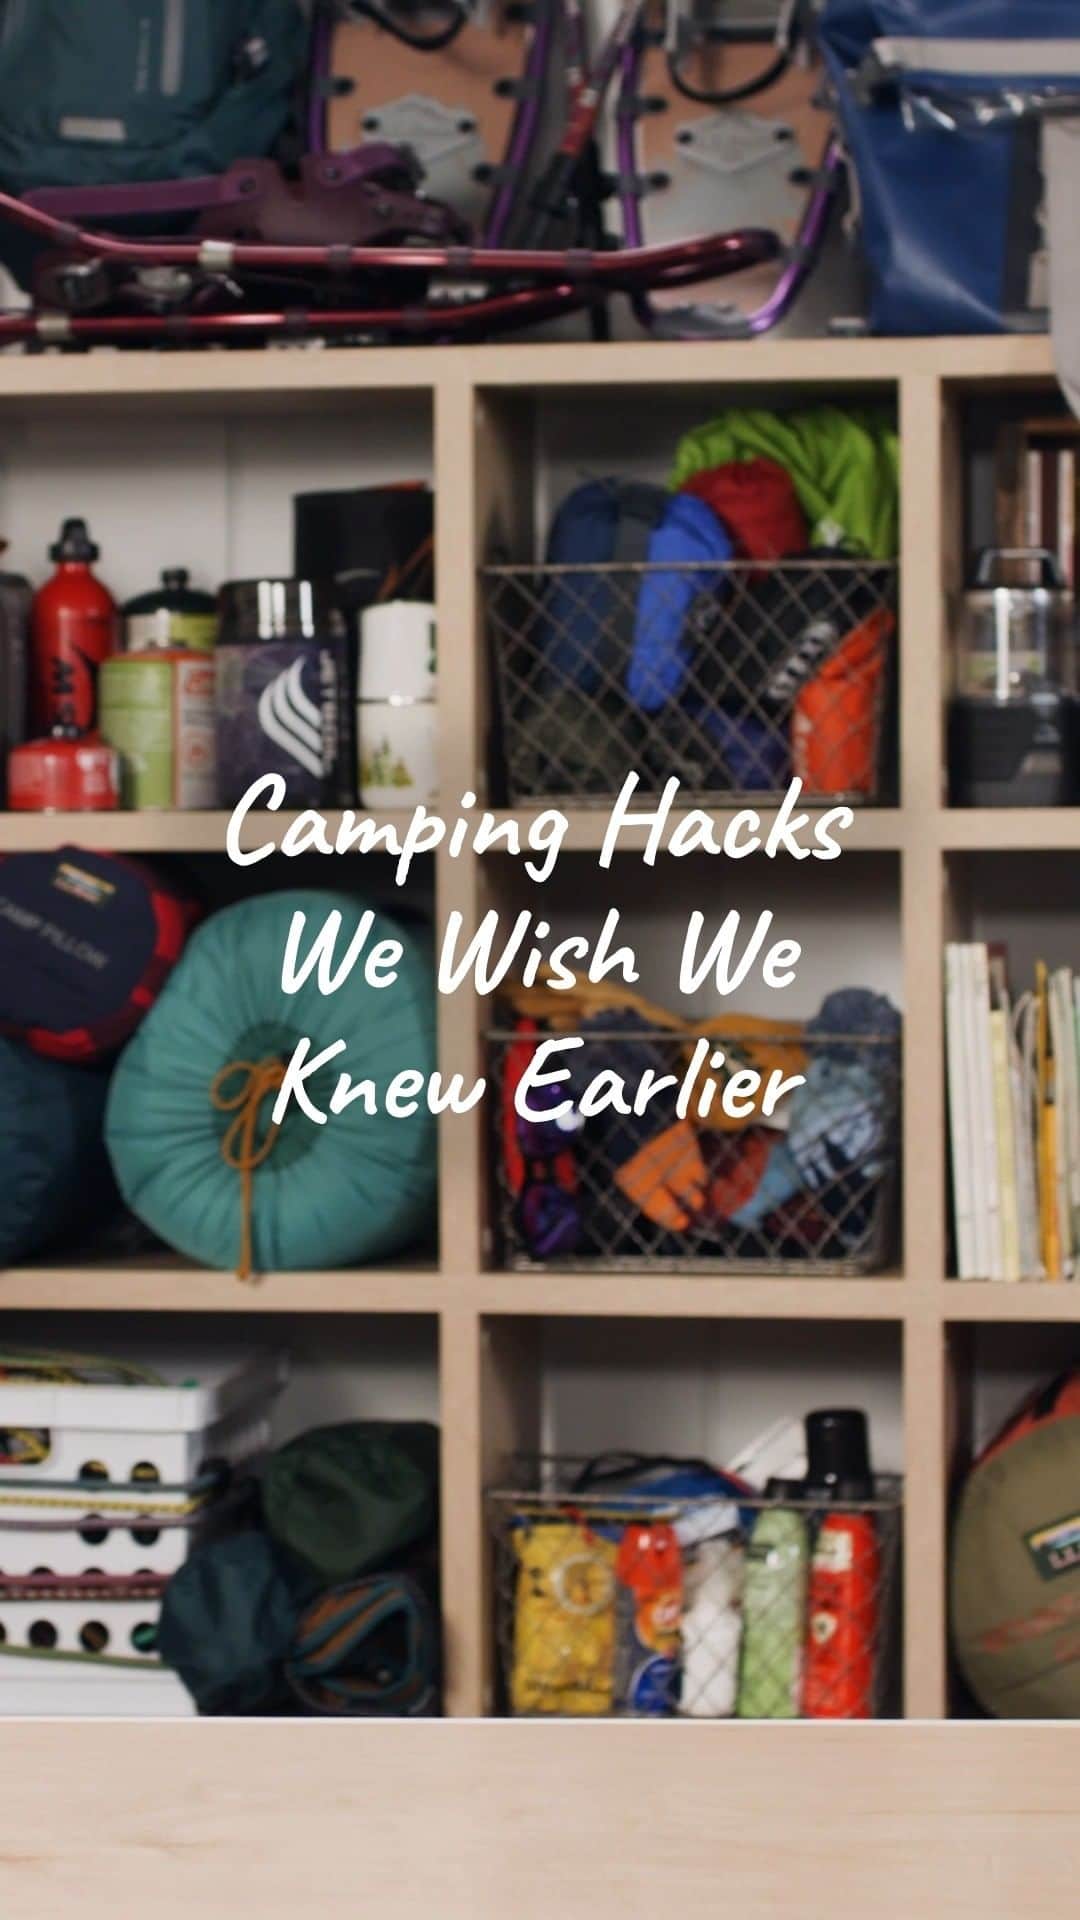 L.L.Beanのインスタグラム：「Looking for clever camping hacks to make packing easier, cooking tastier and your site comfier? Here are a few to get you started - check out our top 10 hacks, tips and tricks at llbean.com/outside.」